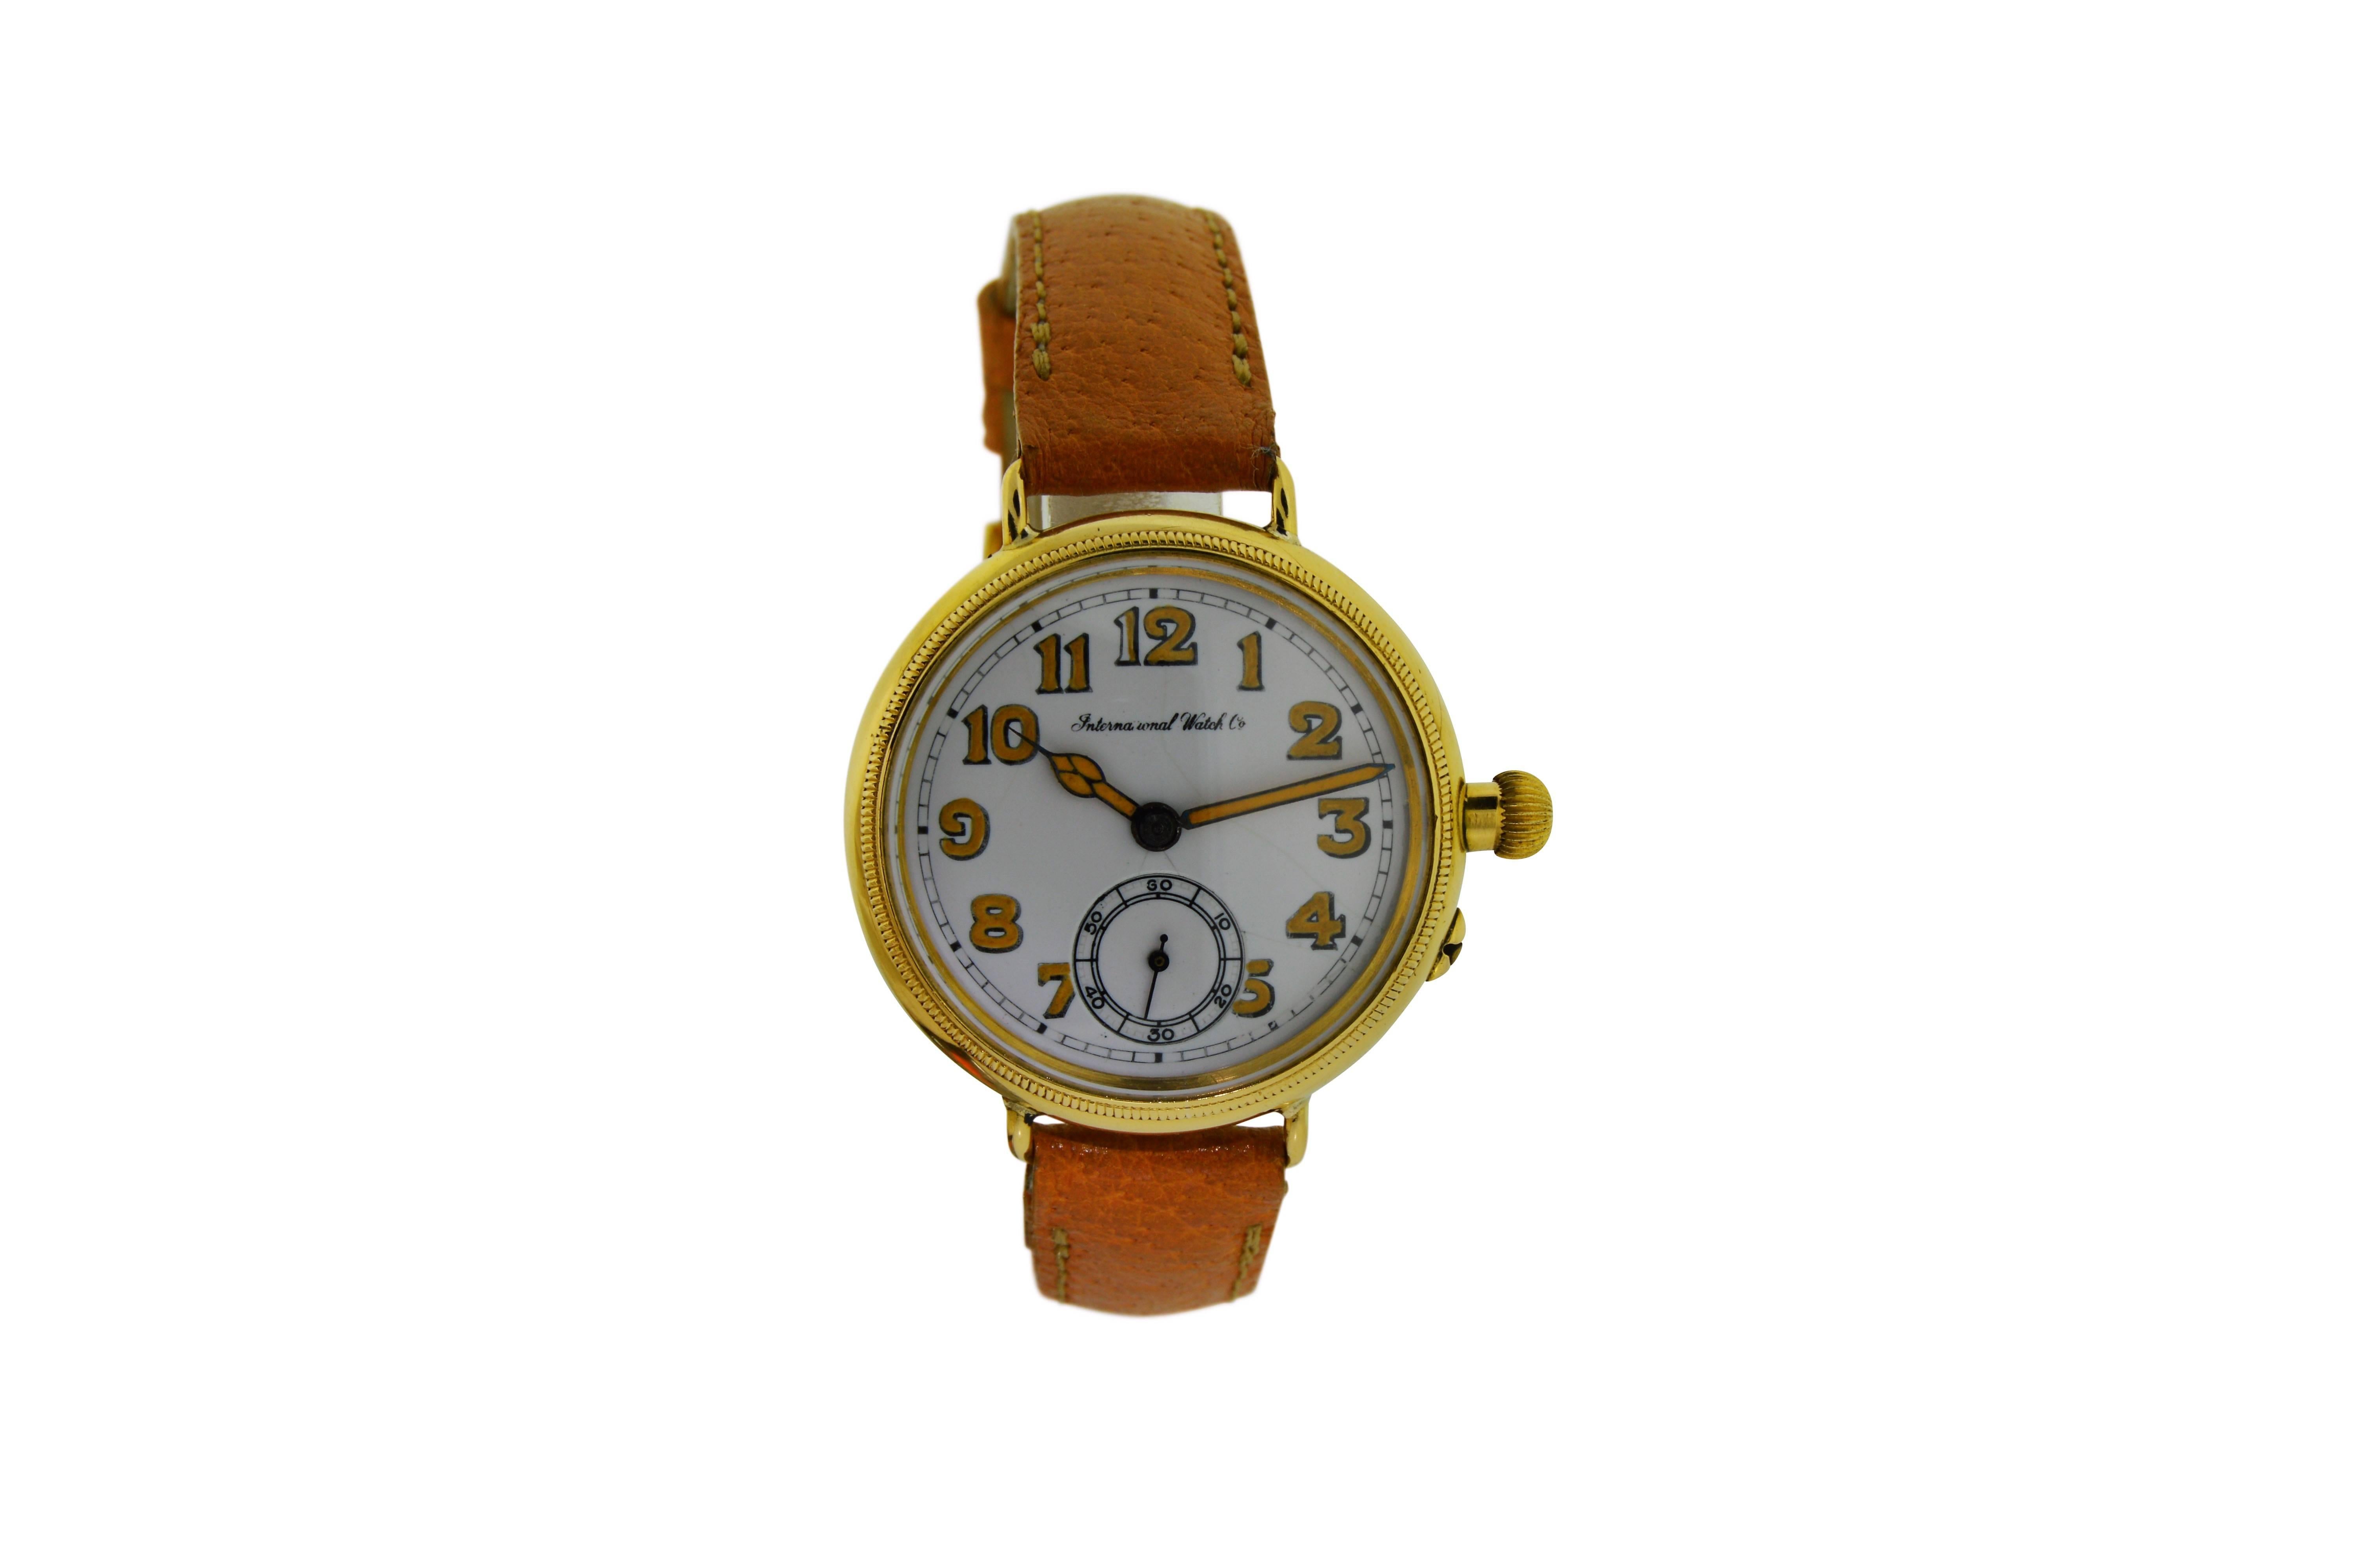 FACTORY / HOUSE: I.W.C. Schaffhausen International Watch Company 
STYLE / REFERENCE: Military / Campaign
METAL / MATERIAL: 18 Kt. Yellow Gold
DIMENSIONS: 39mm X 34mm
CIRCA: 1915 
MOVEMENT / CALIBER: Manual Winding / 15 Jewels 
DIAL / HANDS: Enamel